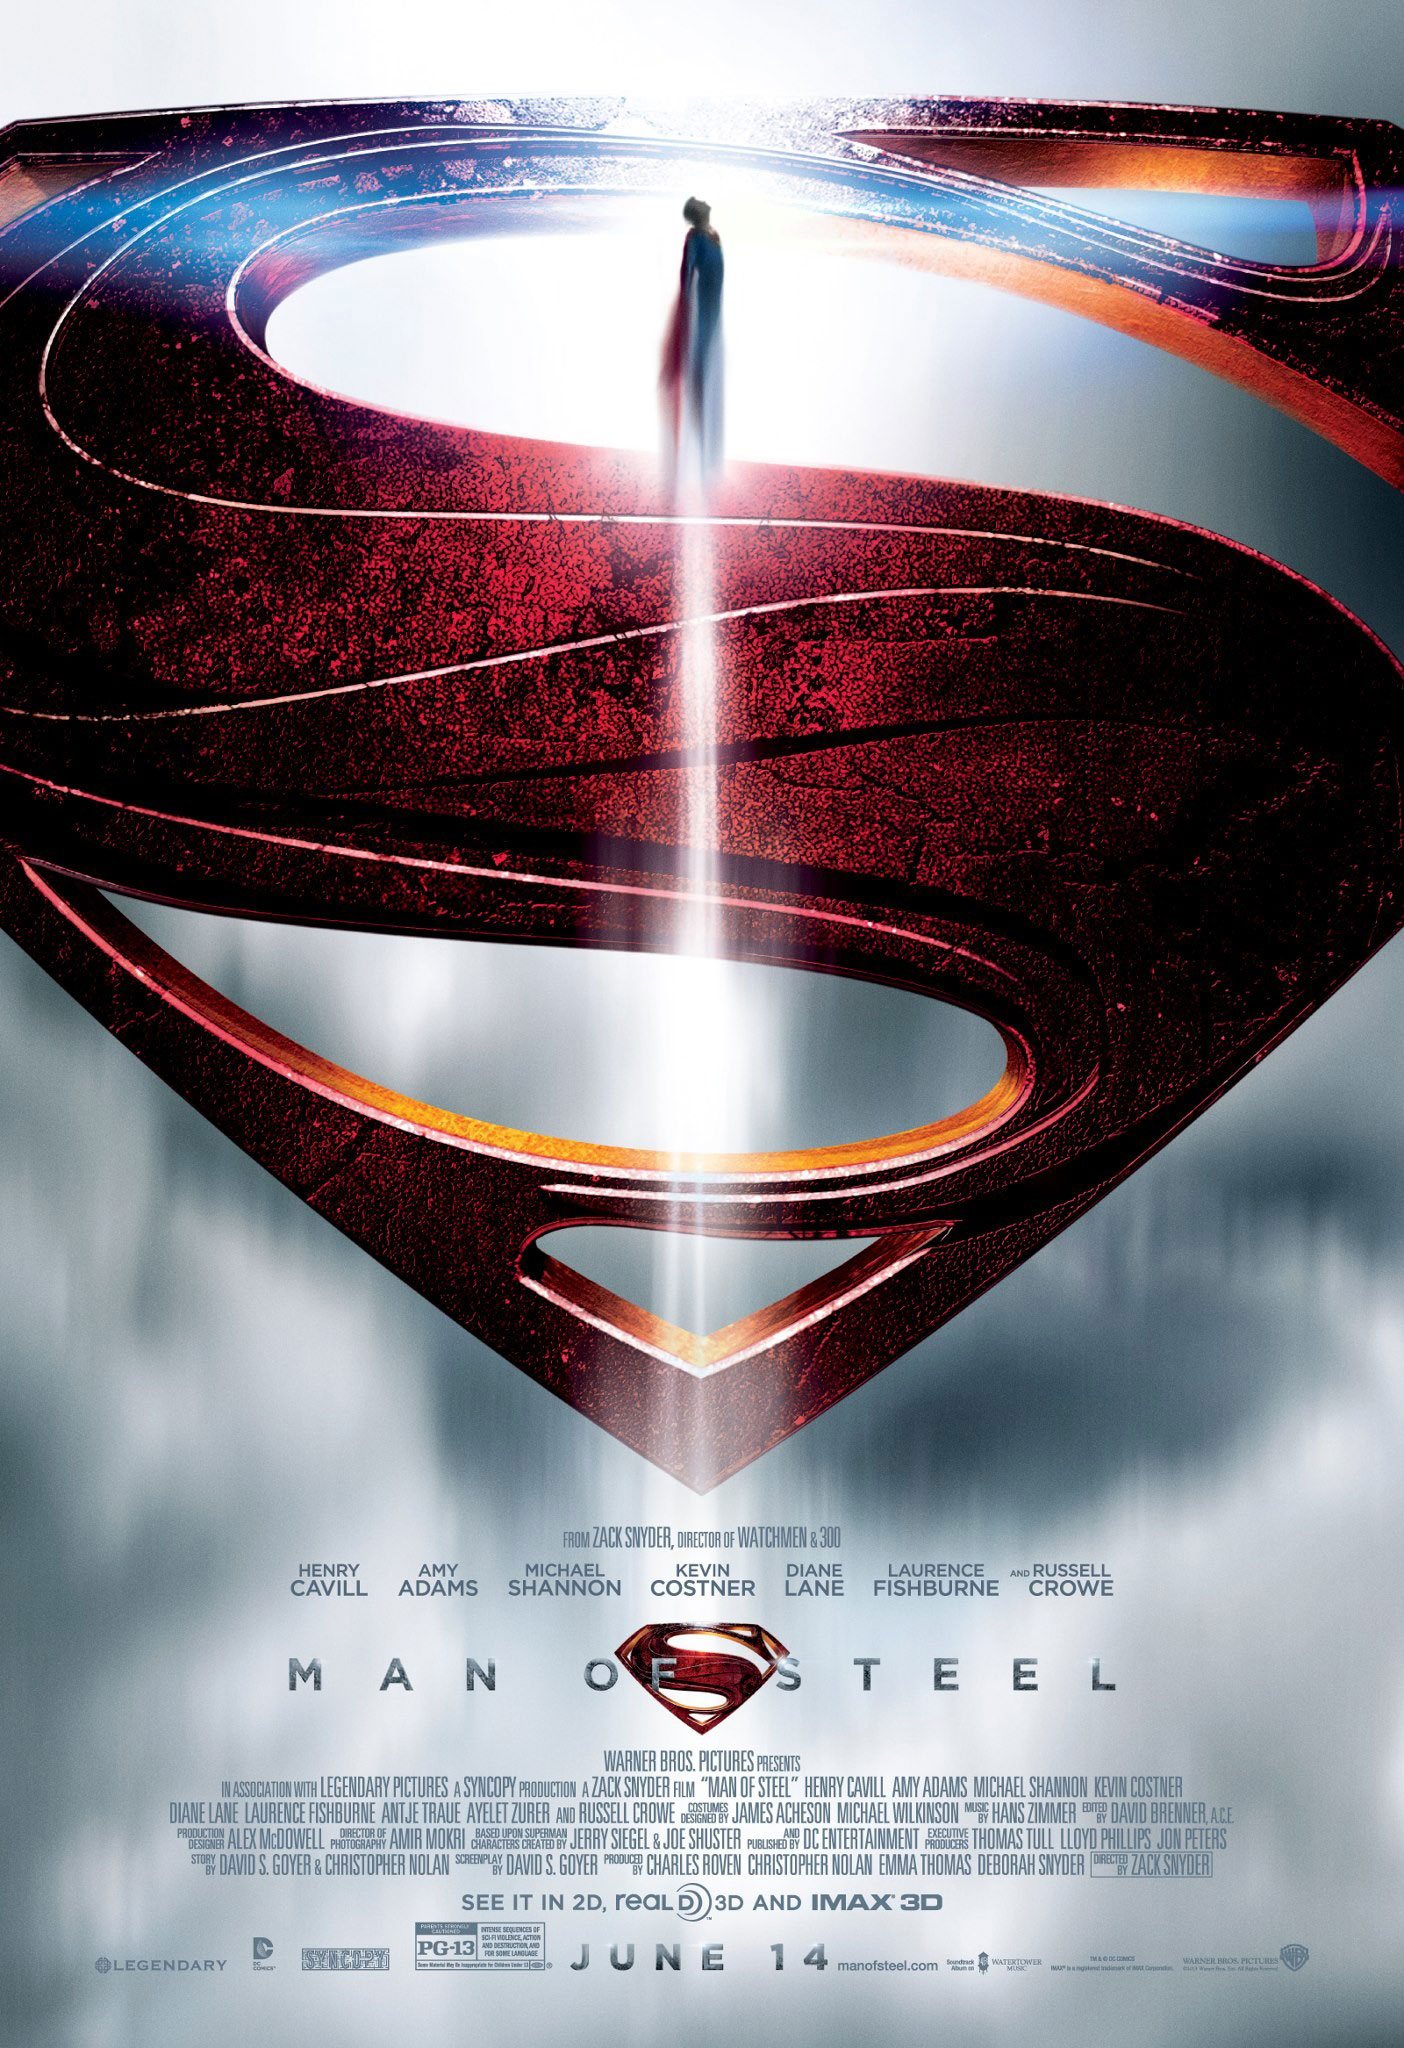 Man of Steel Official Trailer #2 (2013) - Superman Movie HD 